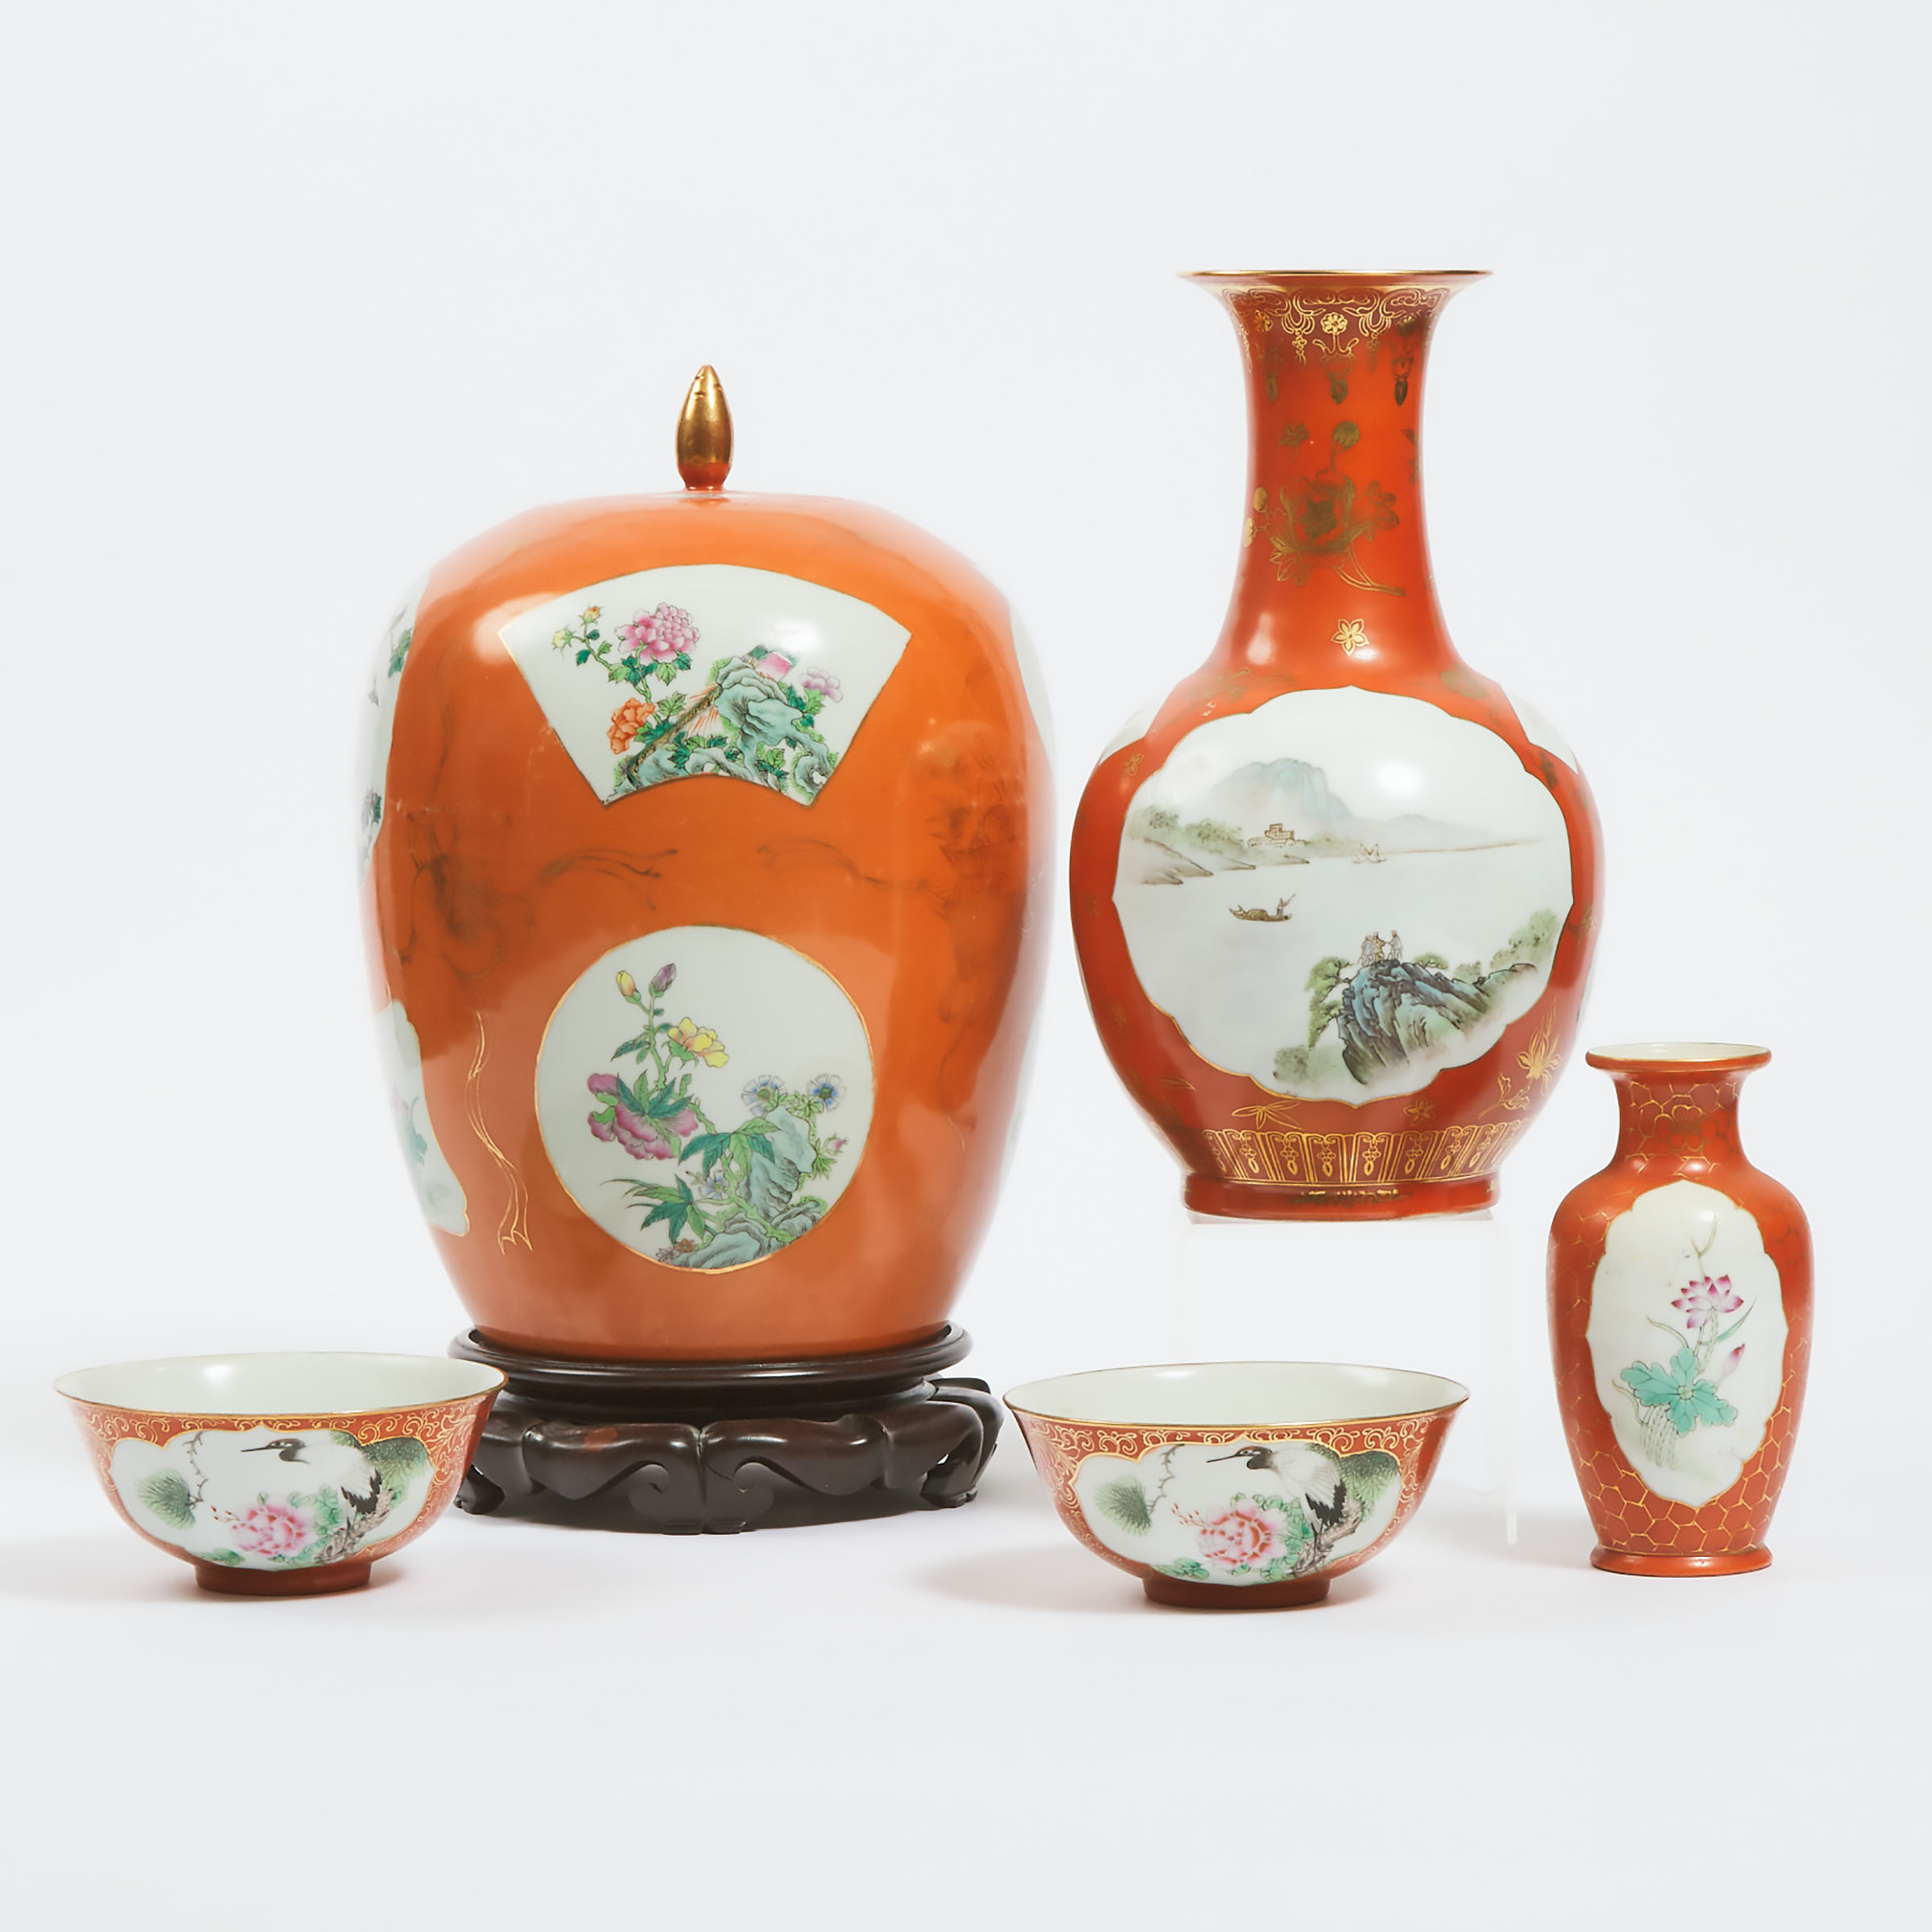 A Group of Five Chinese Coral-Ground Porcelain Wares, Mid 20th Century